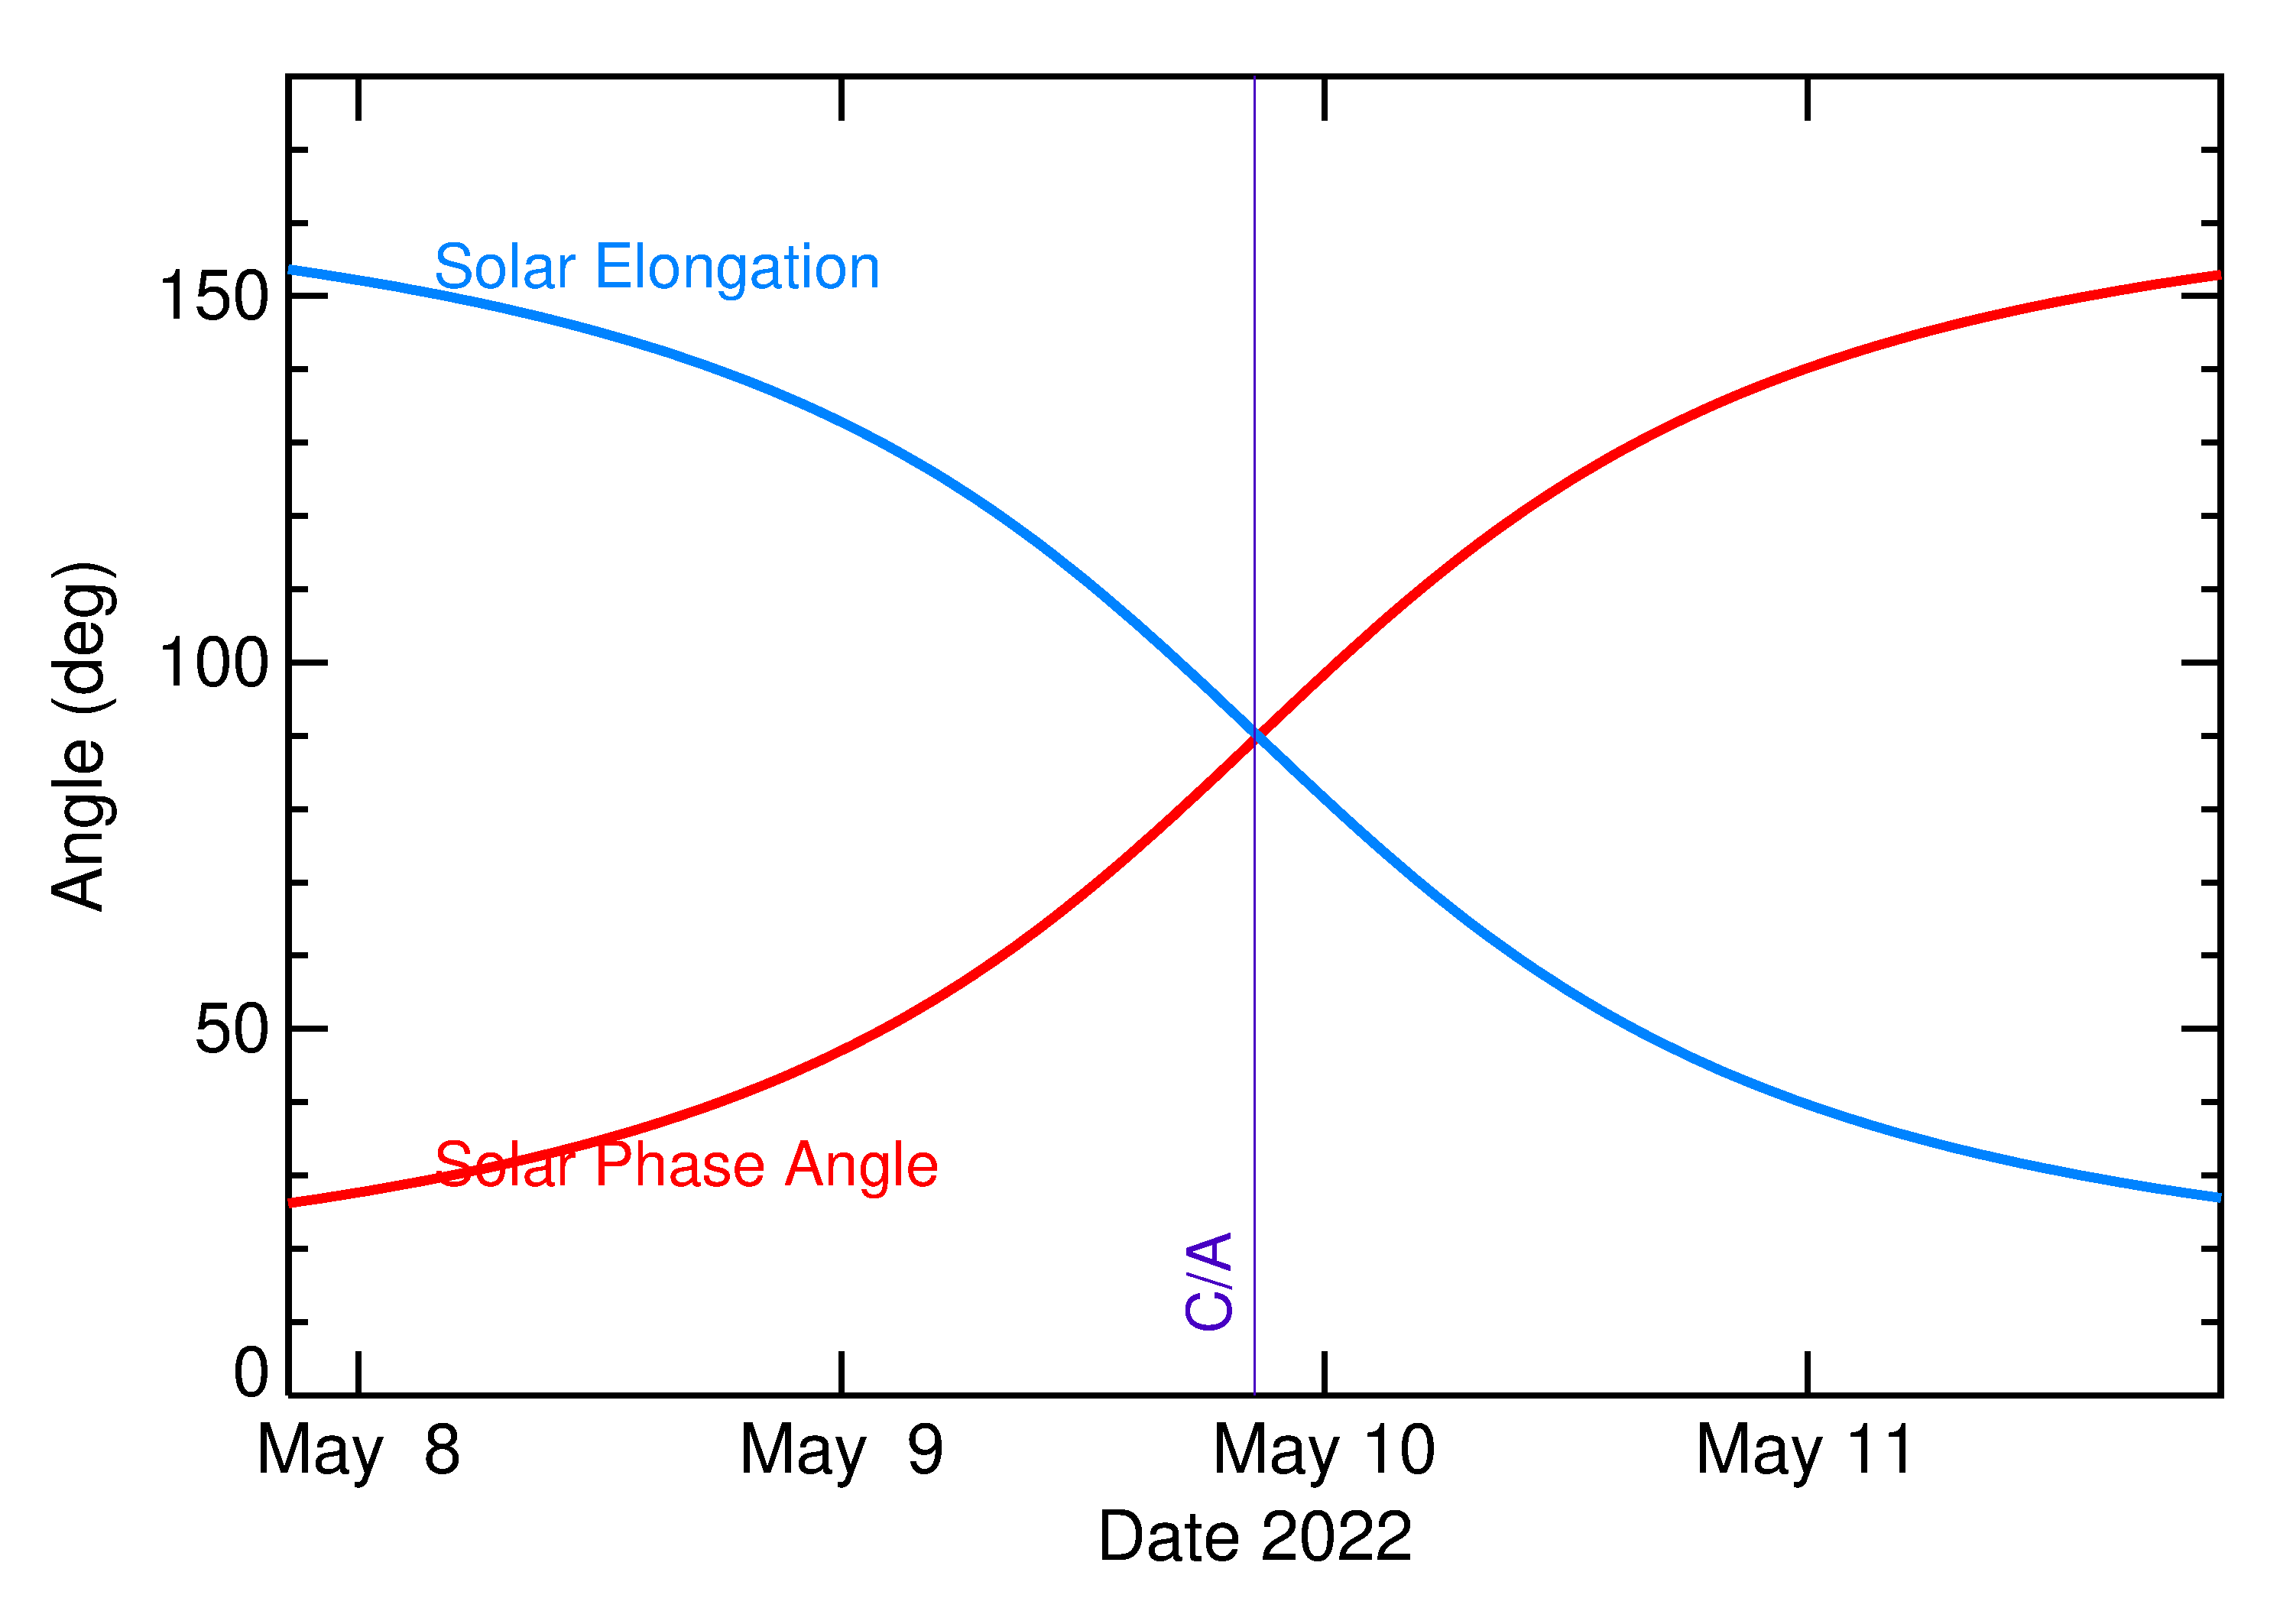 Solar Elongation and Solar Phase Angle of 2022 JM in the days around closest approach